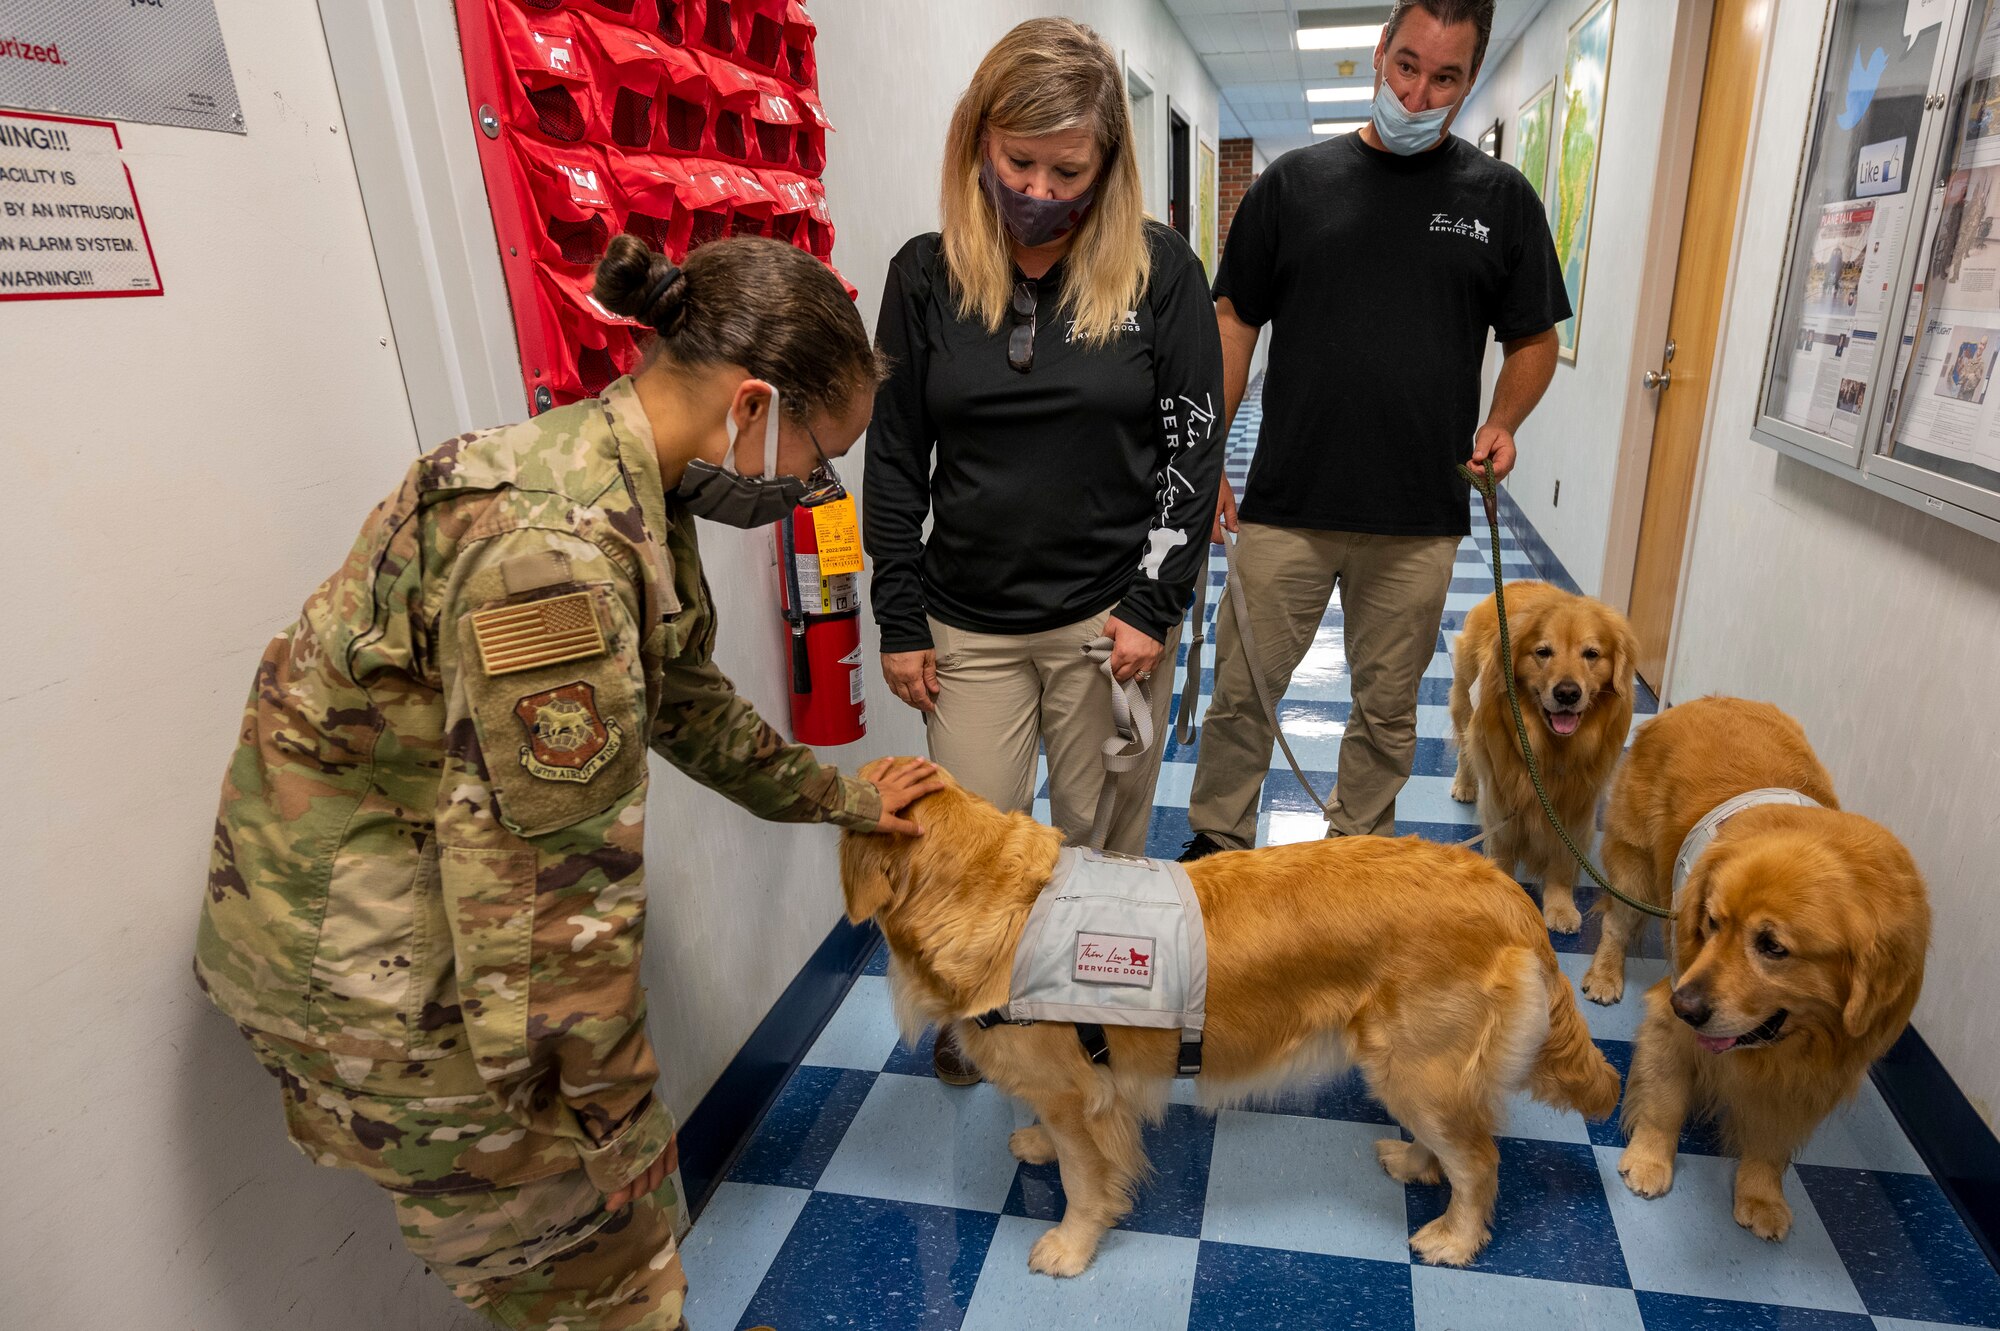 U.S. Air Force Staff Sgt. Dominique Wright, a command and control specialist for the 167th Airlift Wing, is greeted by Thin Line Service Dogs, Moose, Chief and September, along with the organization’s founders Anjanette and Wayne Montano.